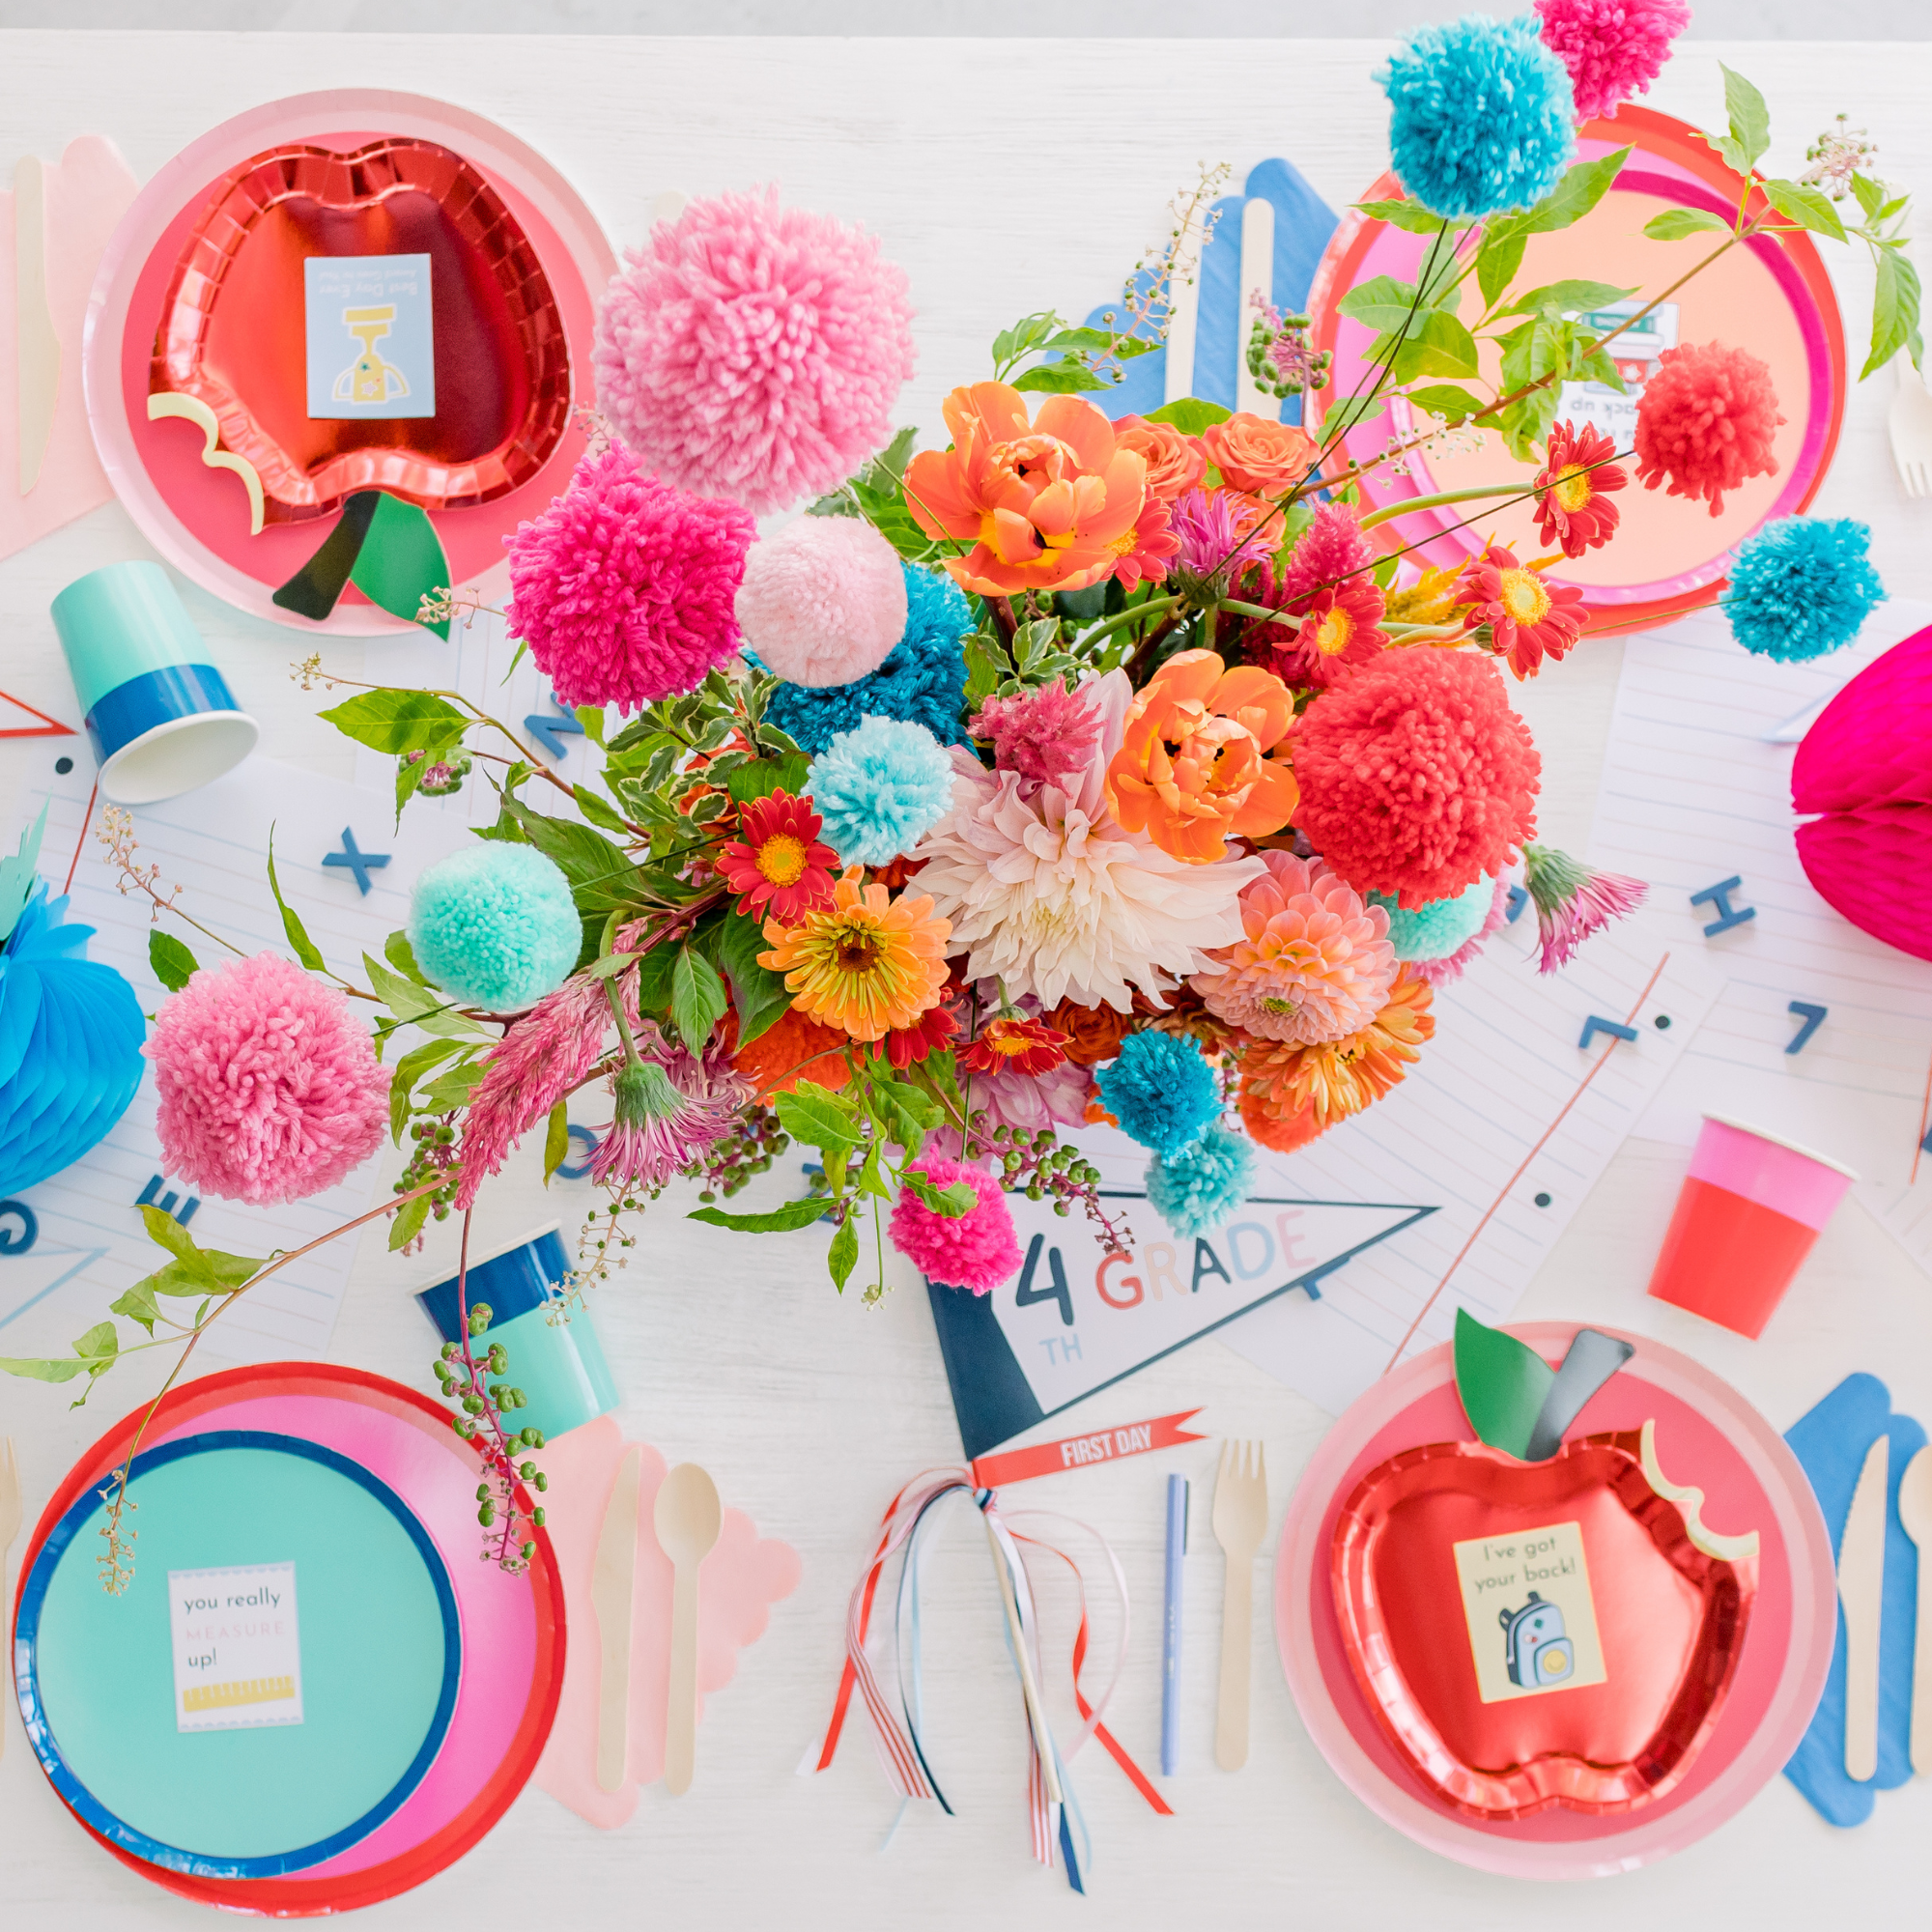 BACK TO SCHOOL PARTY IDEAS AND MUST-HAVE SCHOOL SUPPLIES – Bonjour Fête